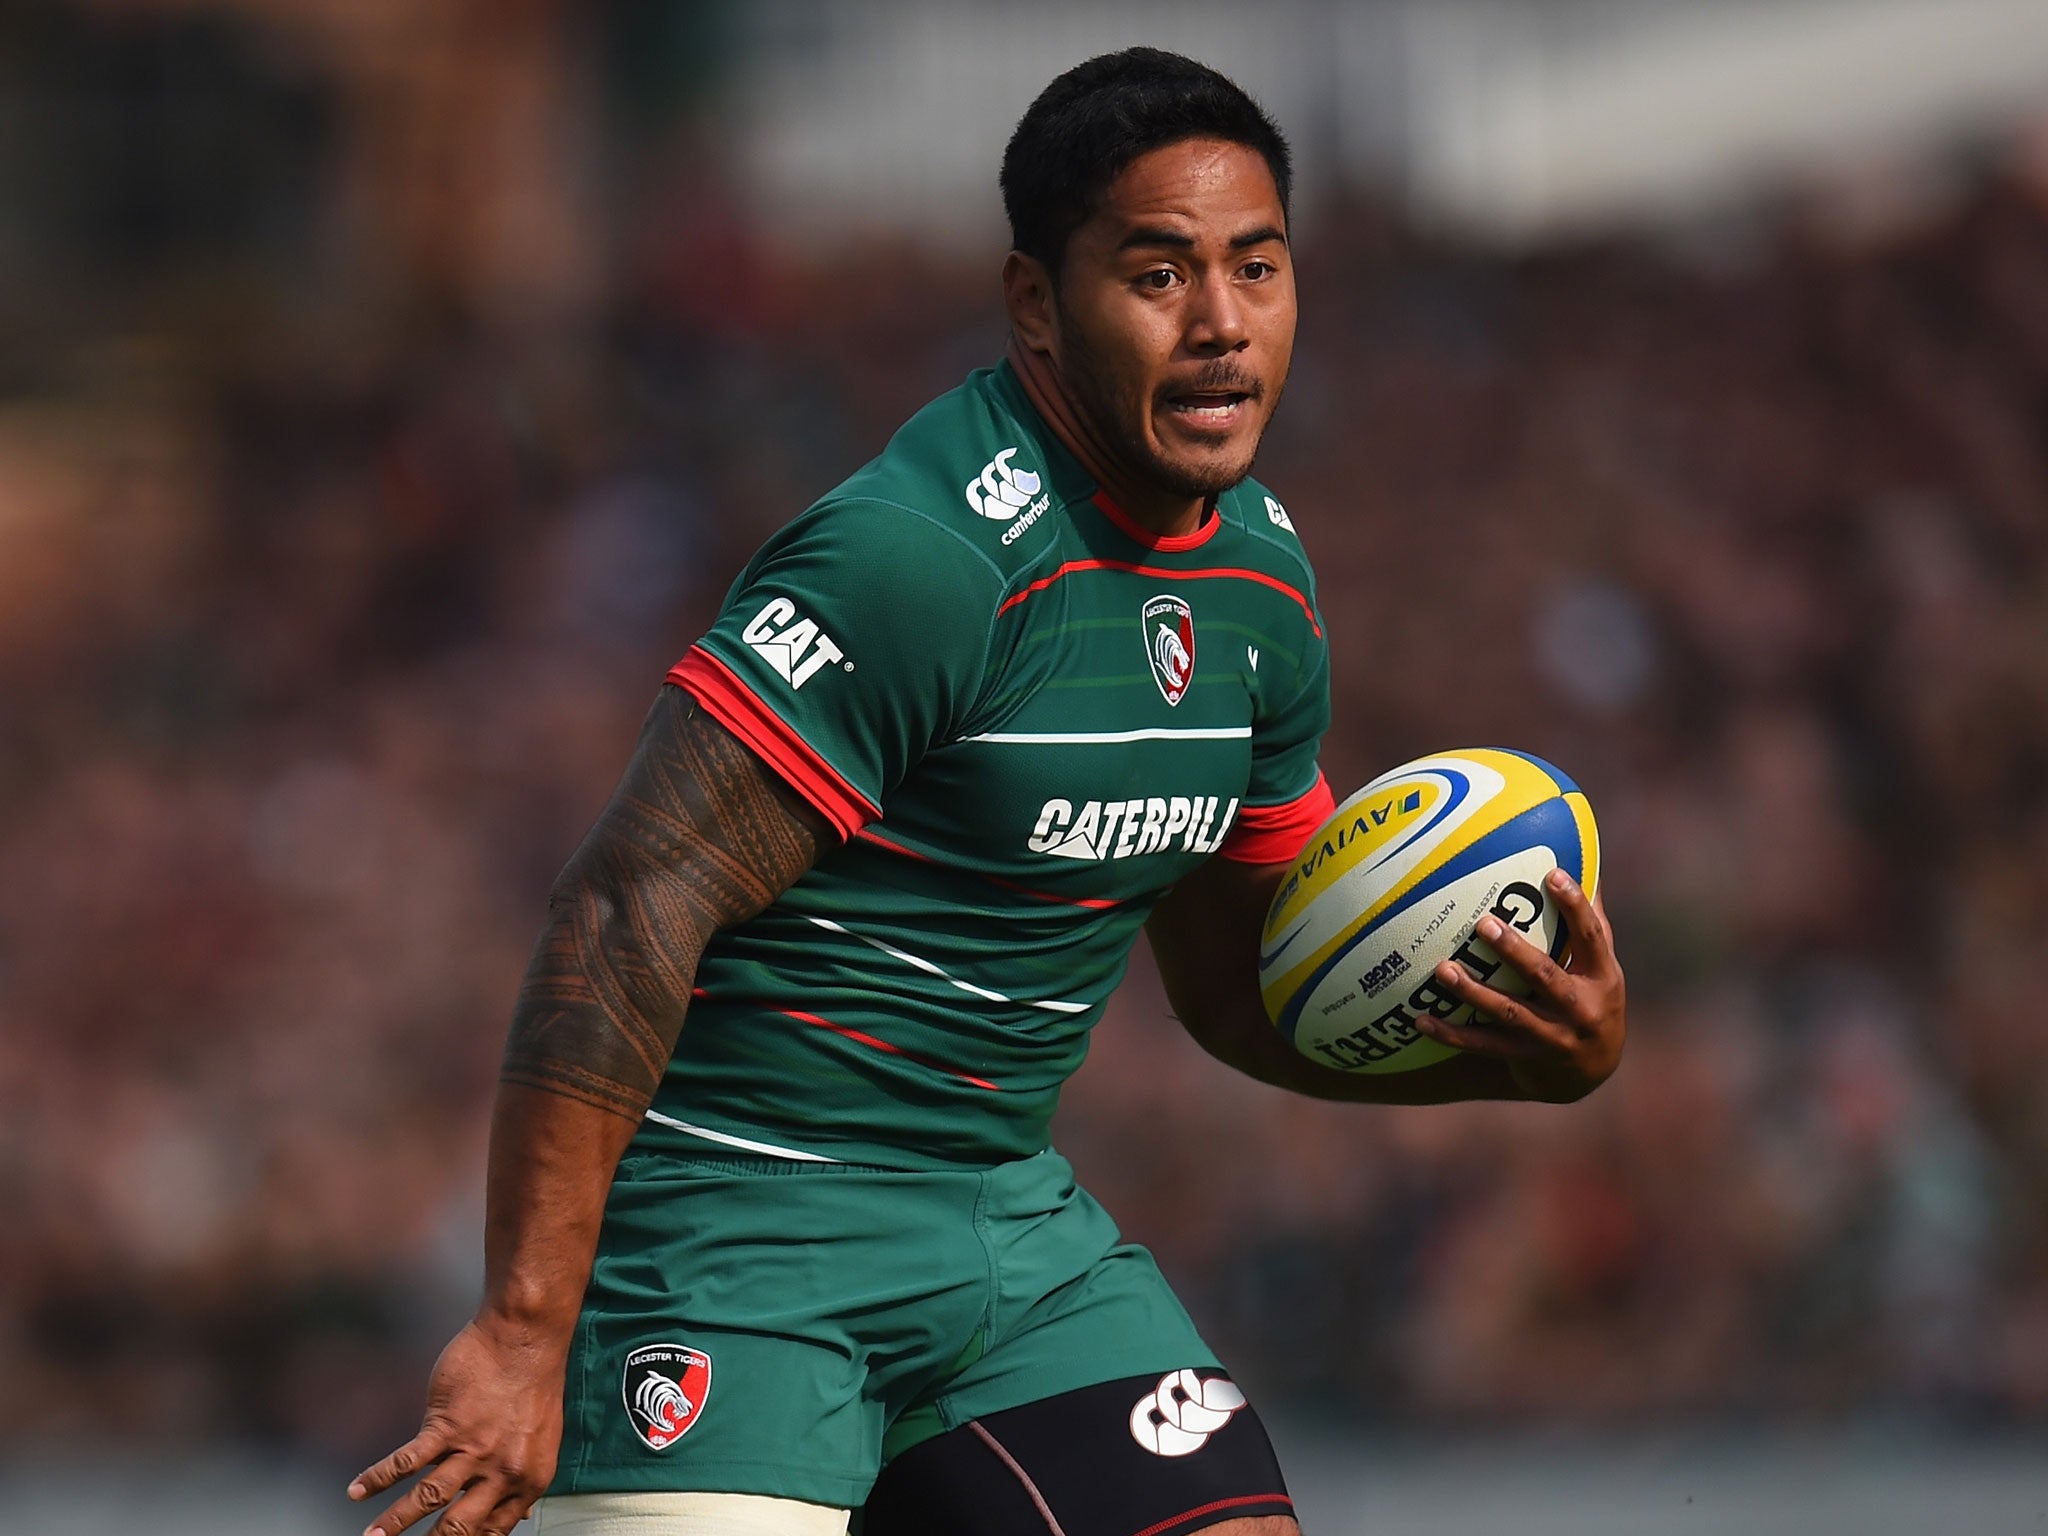 Manu Tuilagi has been ruled out of England's autumn internationals